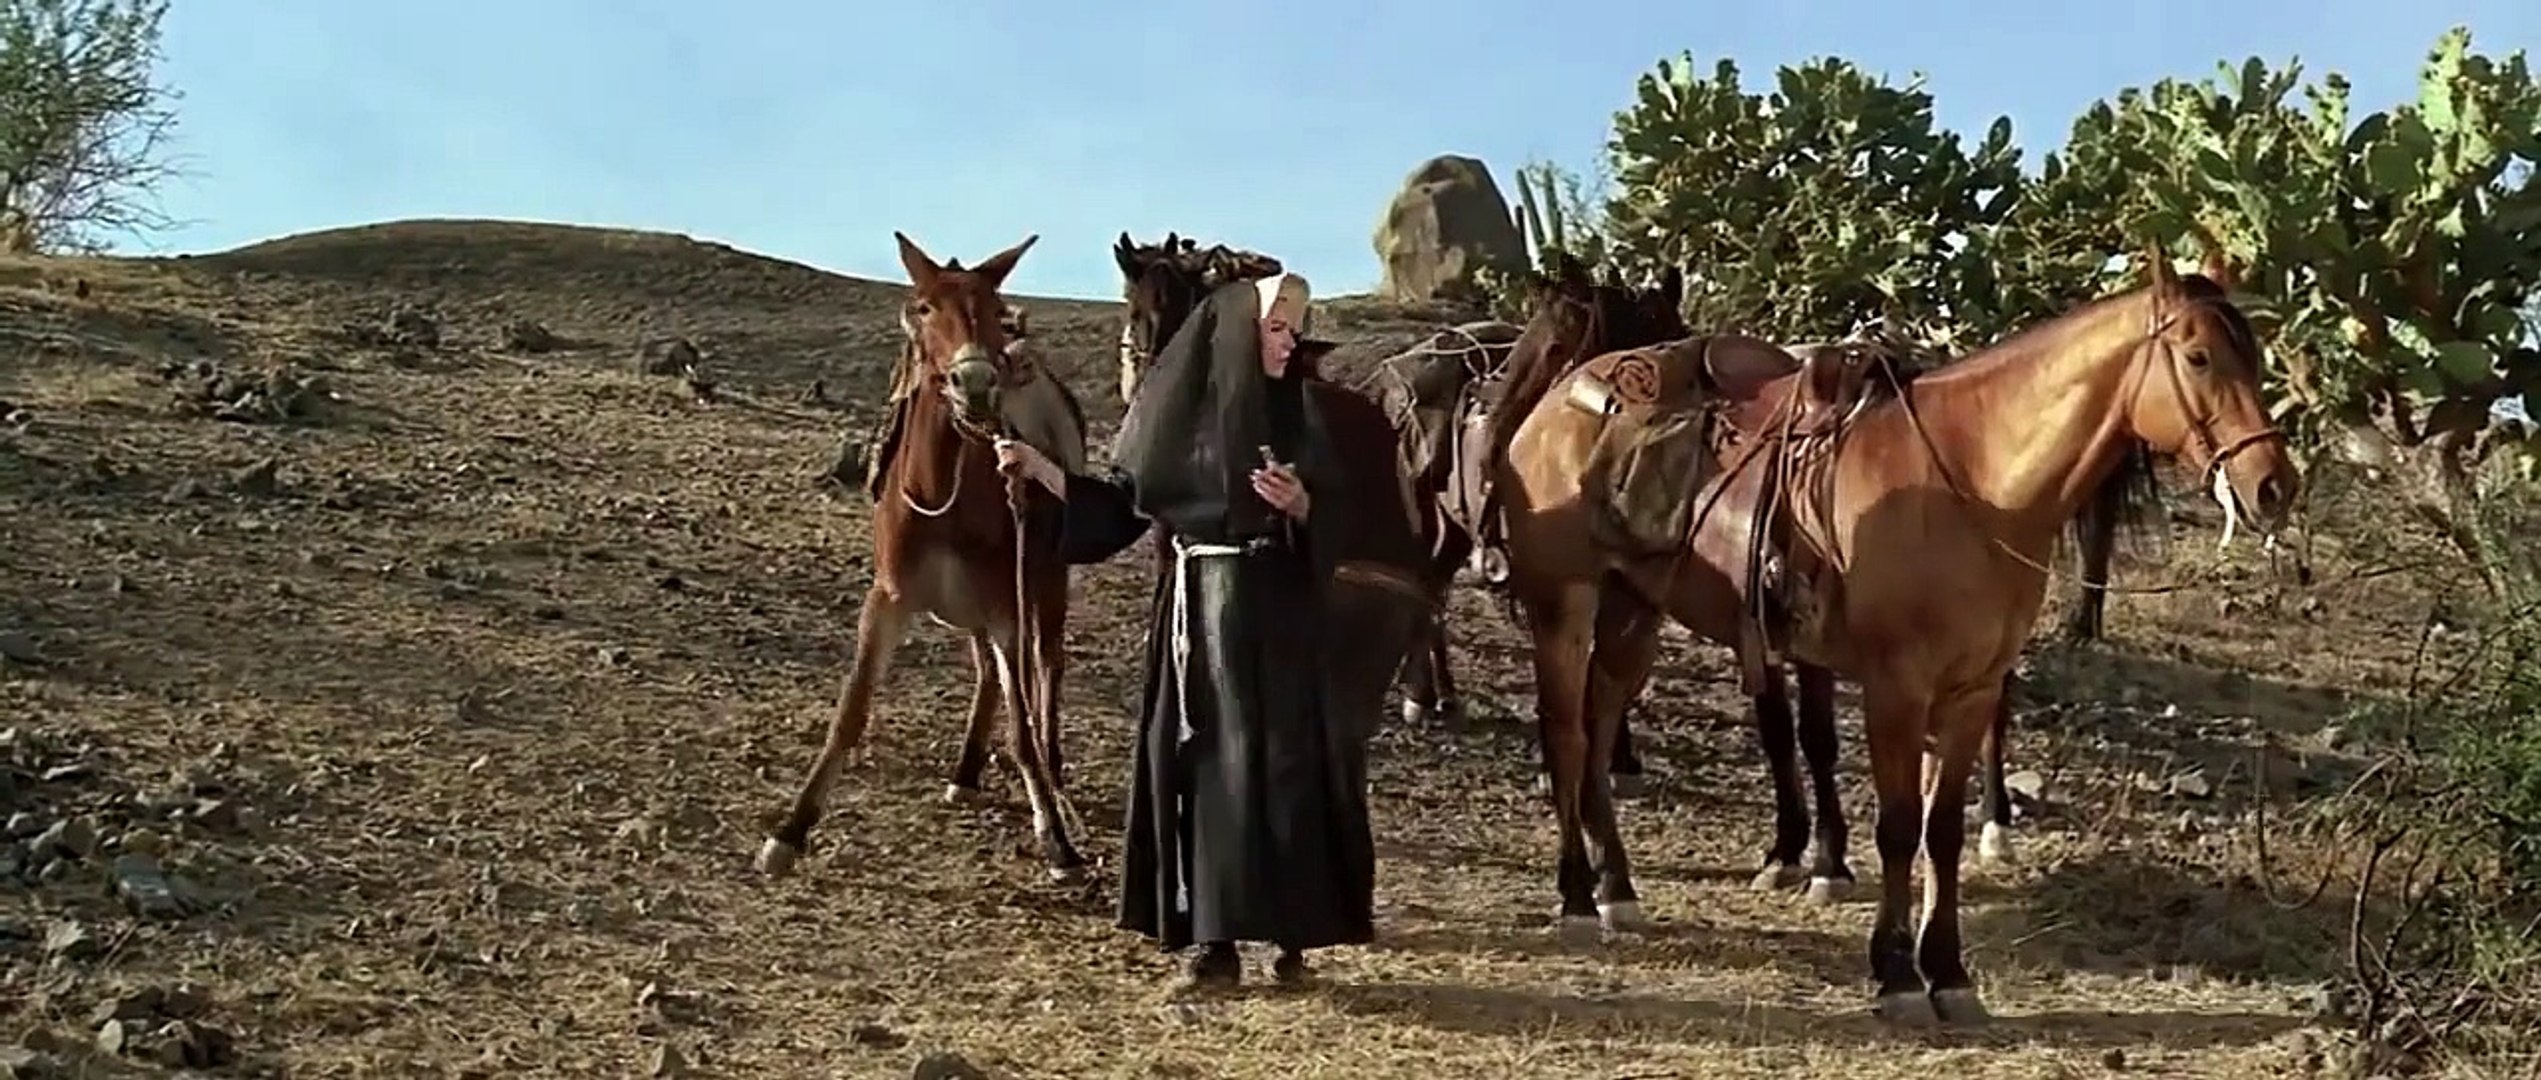 Two Mules for sister sara 1970 - Clint Eastwood collection - video  Dailymotion